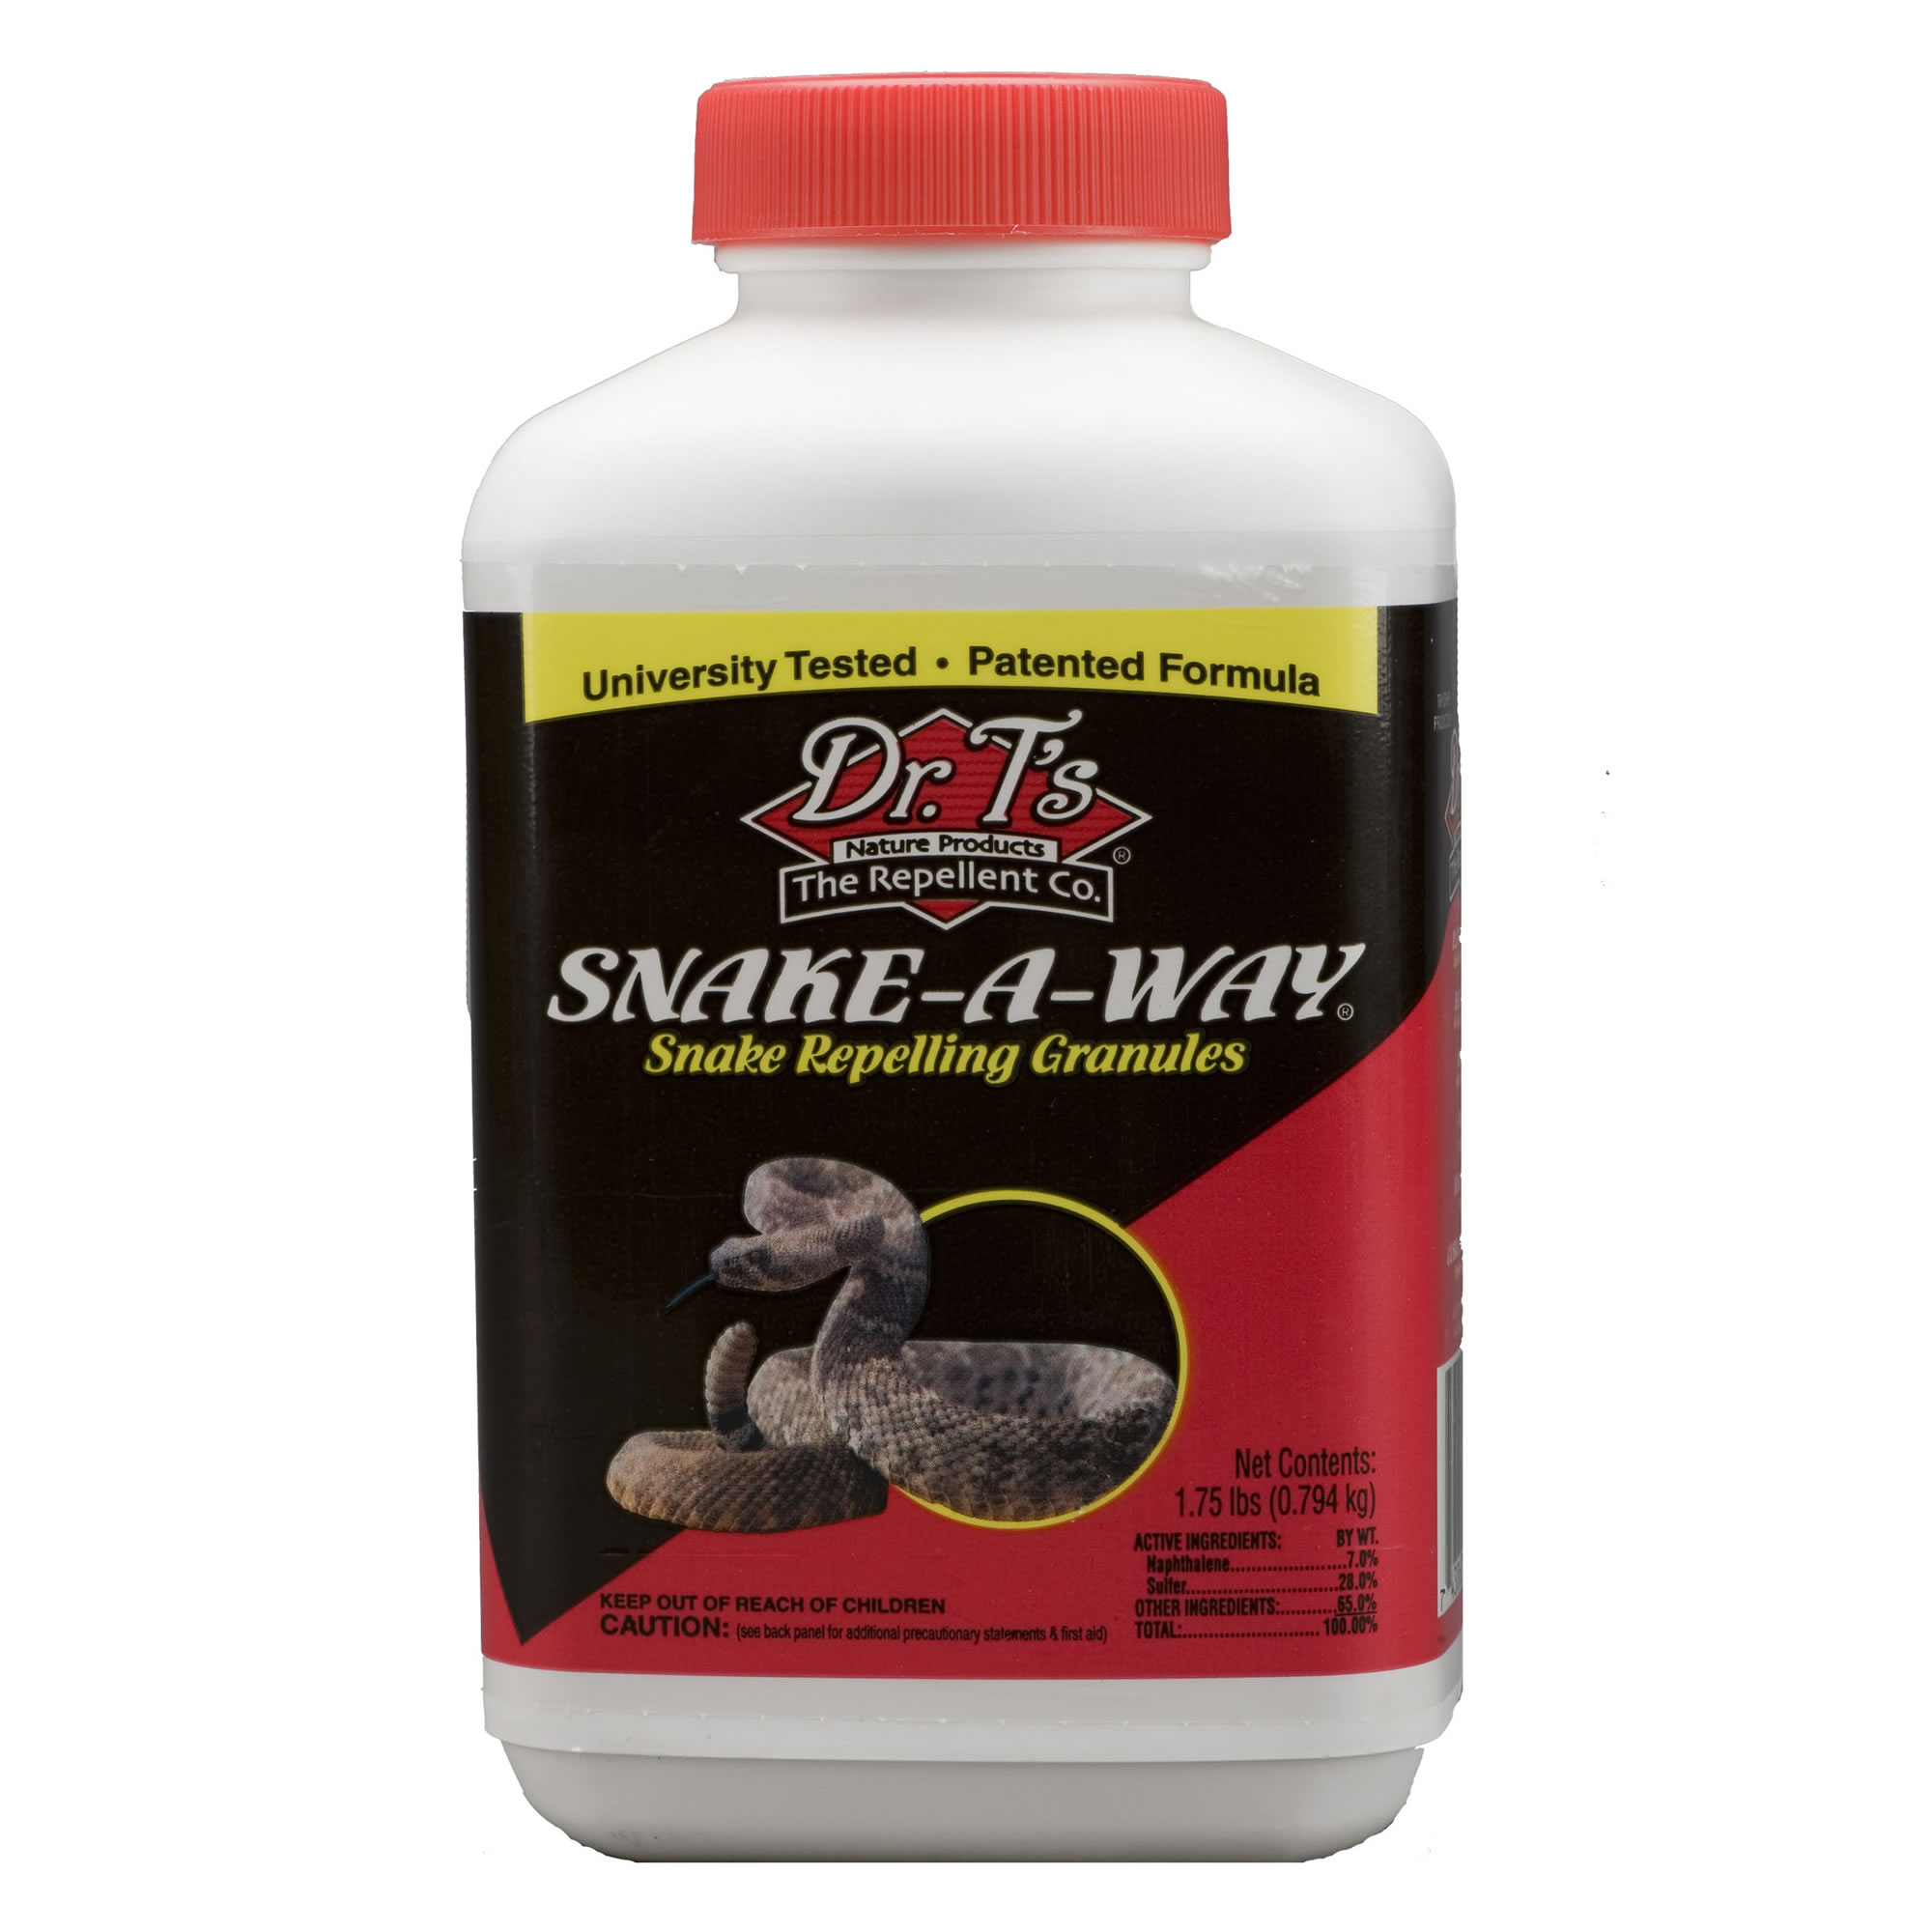 Dr. T's Nature Products Snake-A-Way Snake Repelling Granules